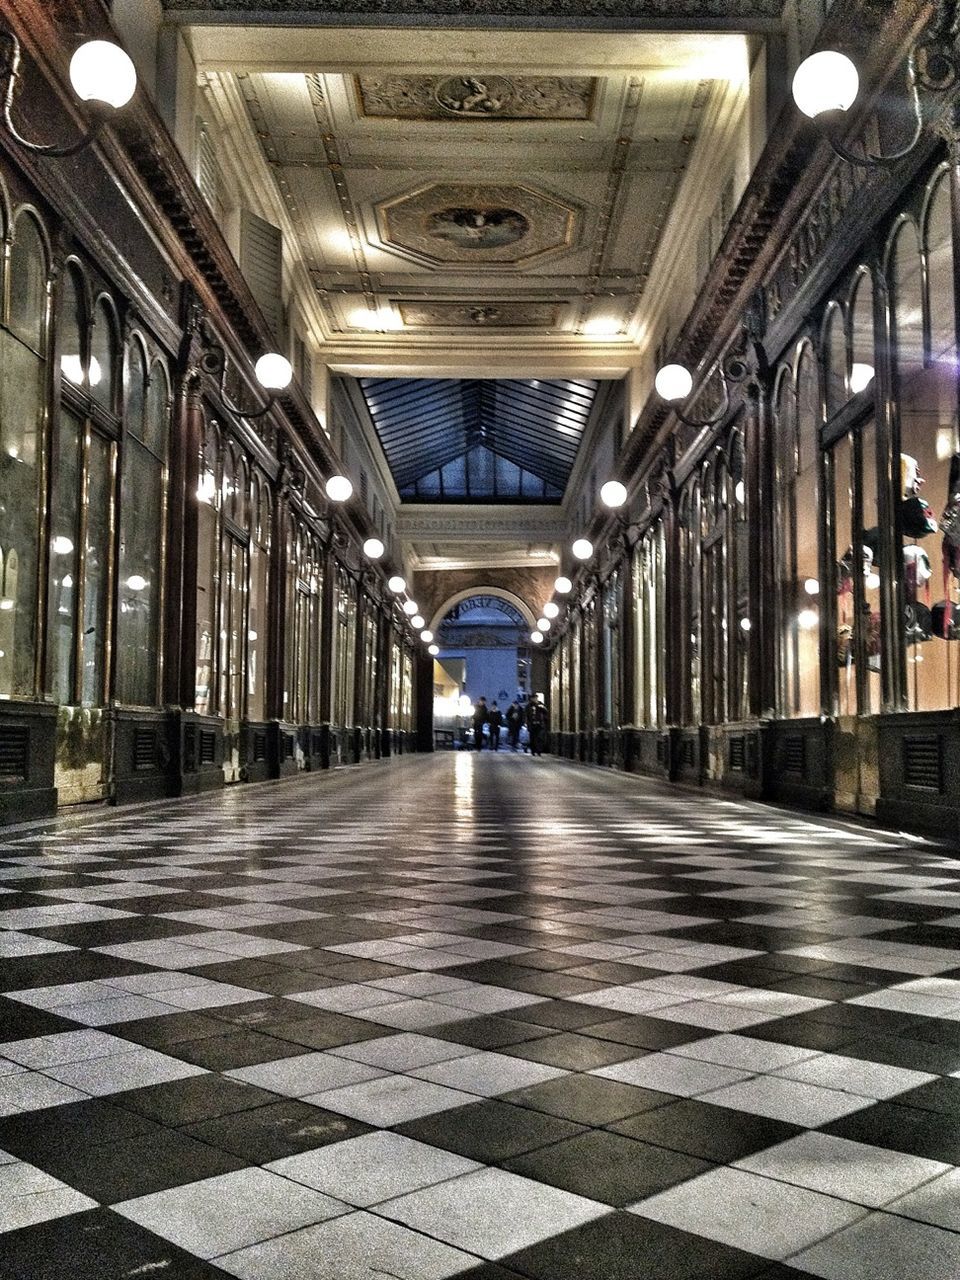 indoors, architecture, built structure, corridor, the way forward, ceiling, flooring, tiled floor, diminishing perspective, architectural column, empty, incidental people, in a row, illuminated, column, lighting equipment, city, colonnade, vanishing point, building